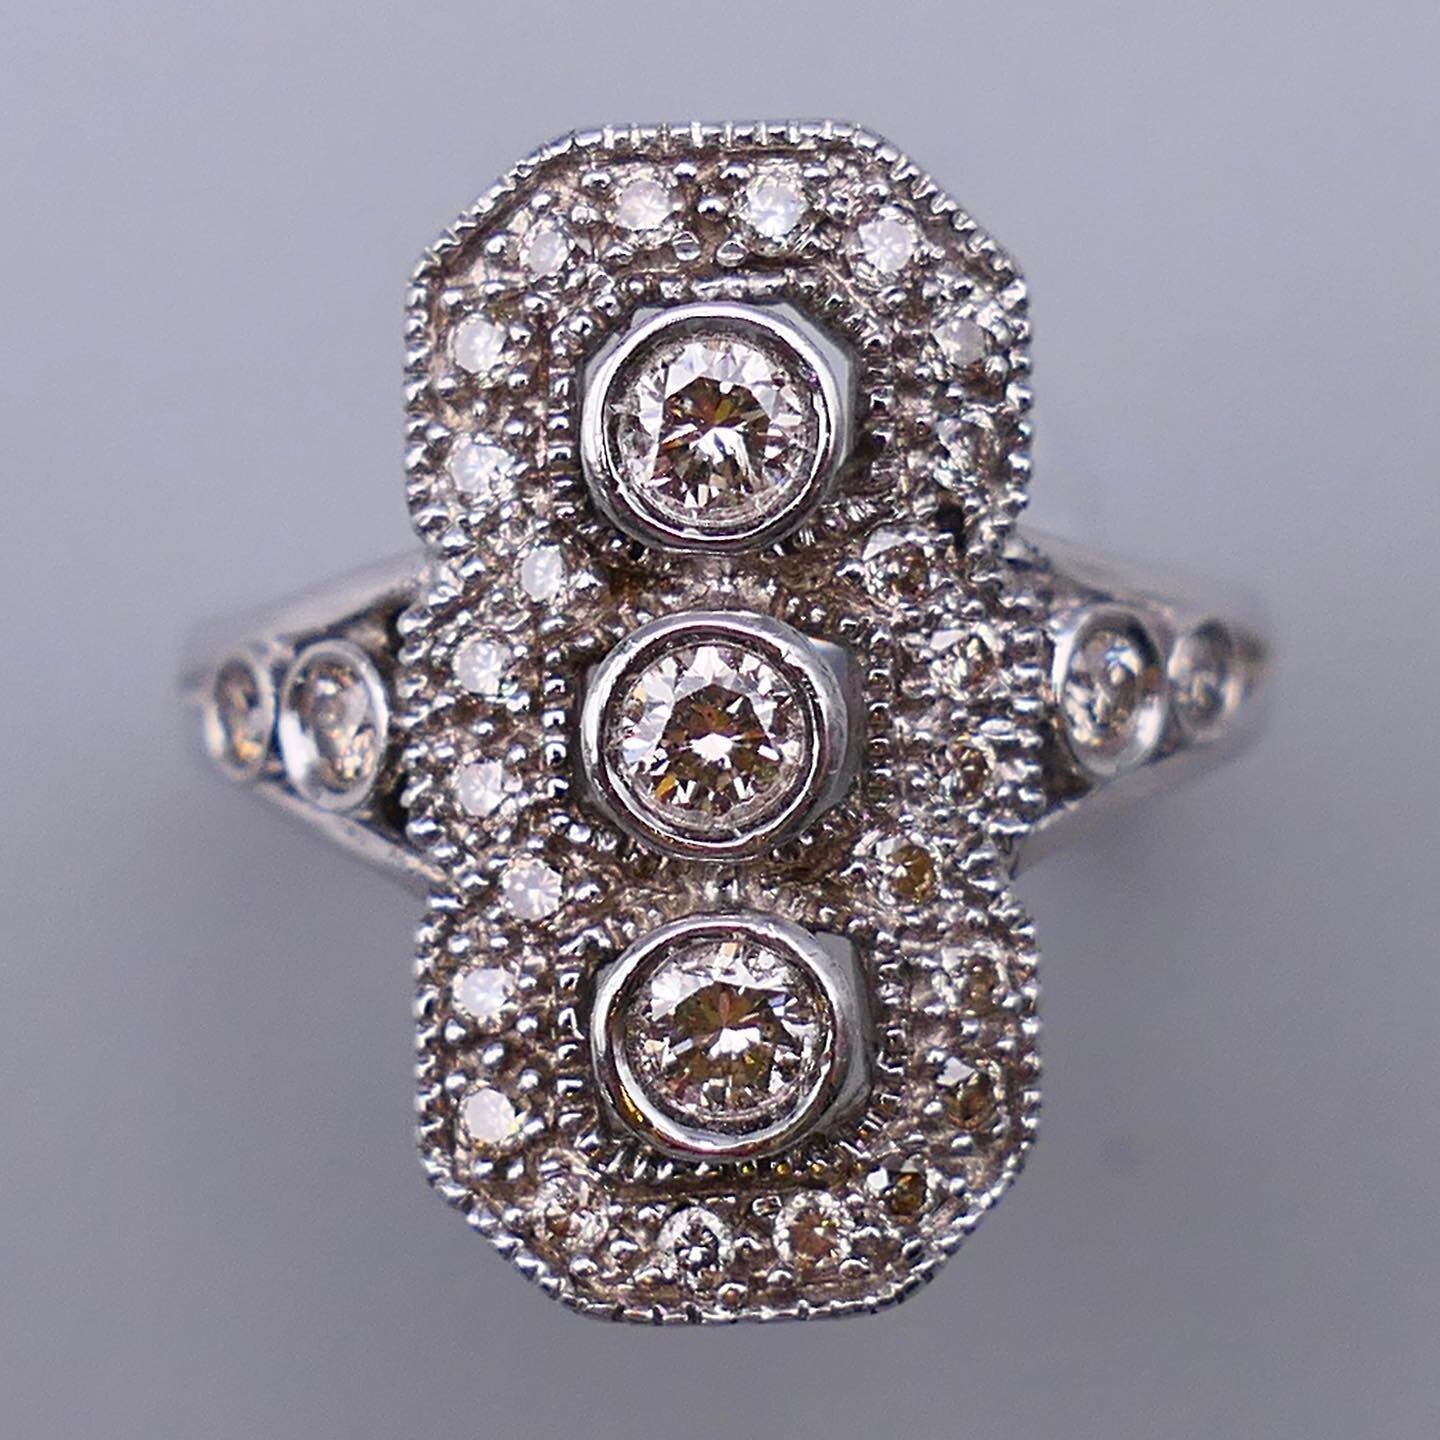 CATALOGUE NOW ONLINE LIVE BIDDING AVAILABLE Lot 112 An 18 ct white gold Art Deco style down the finger ring to be included in our 3rd July 2021 Antiques Interiors and Collectables auction to be be held at 8 Downham Road Ely Cambridgeshire CB6 1AH #au